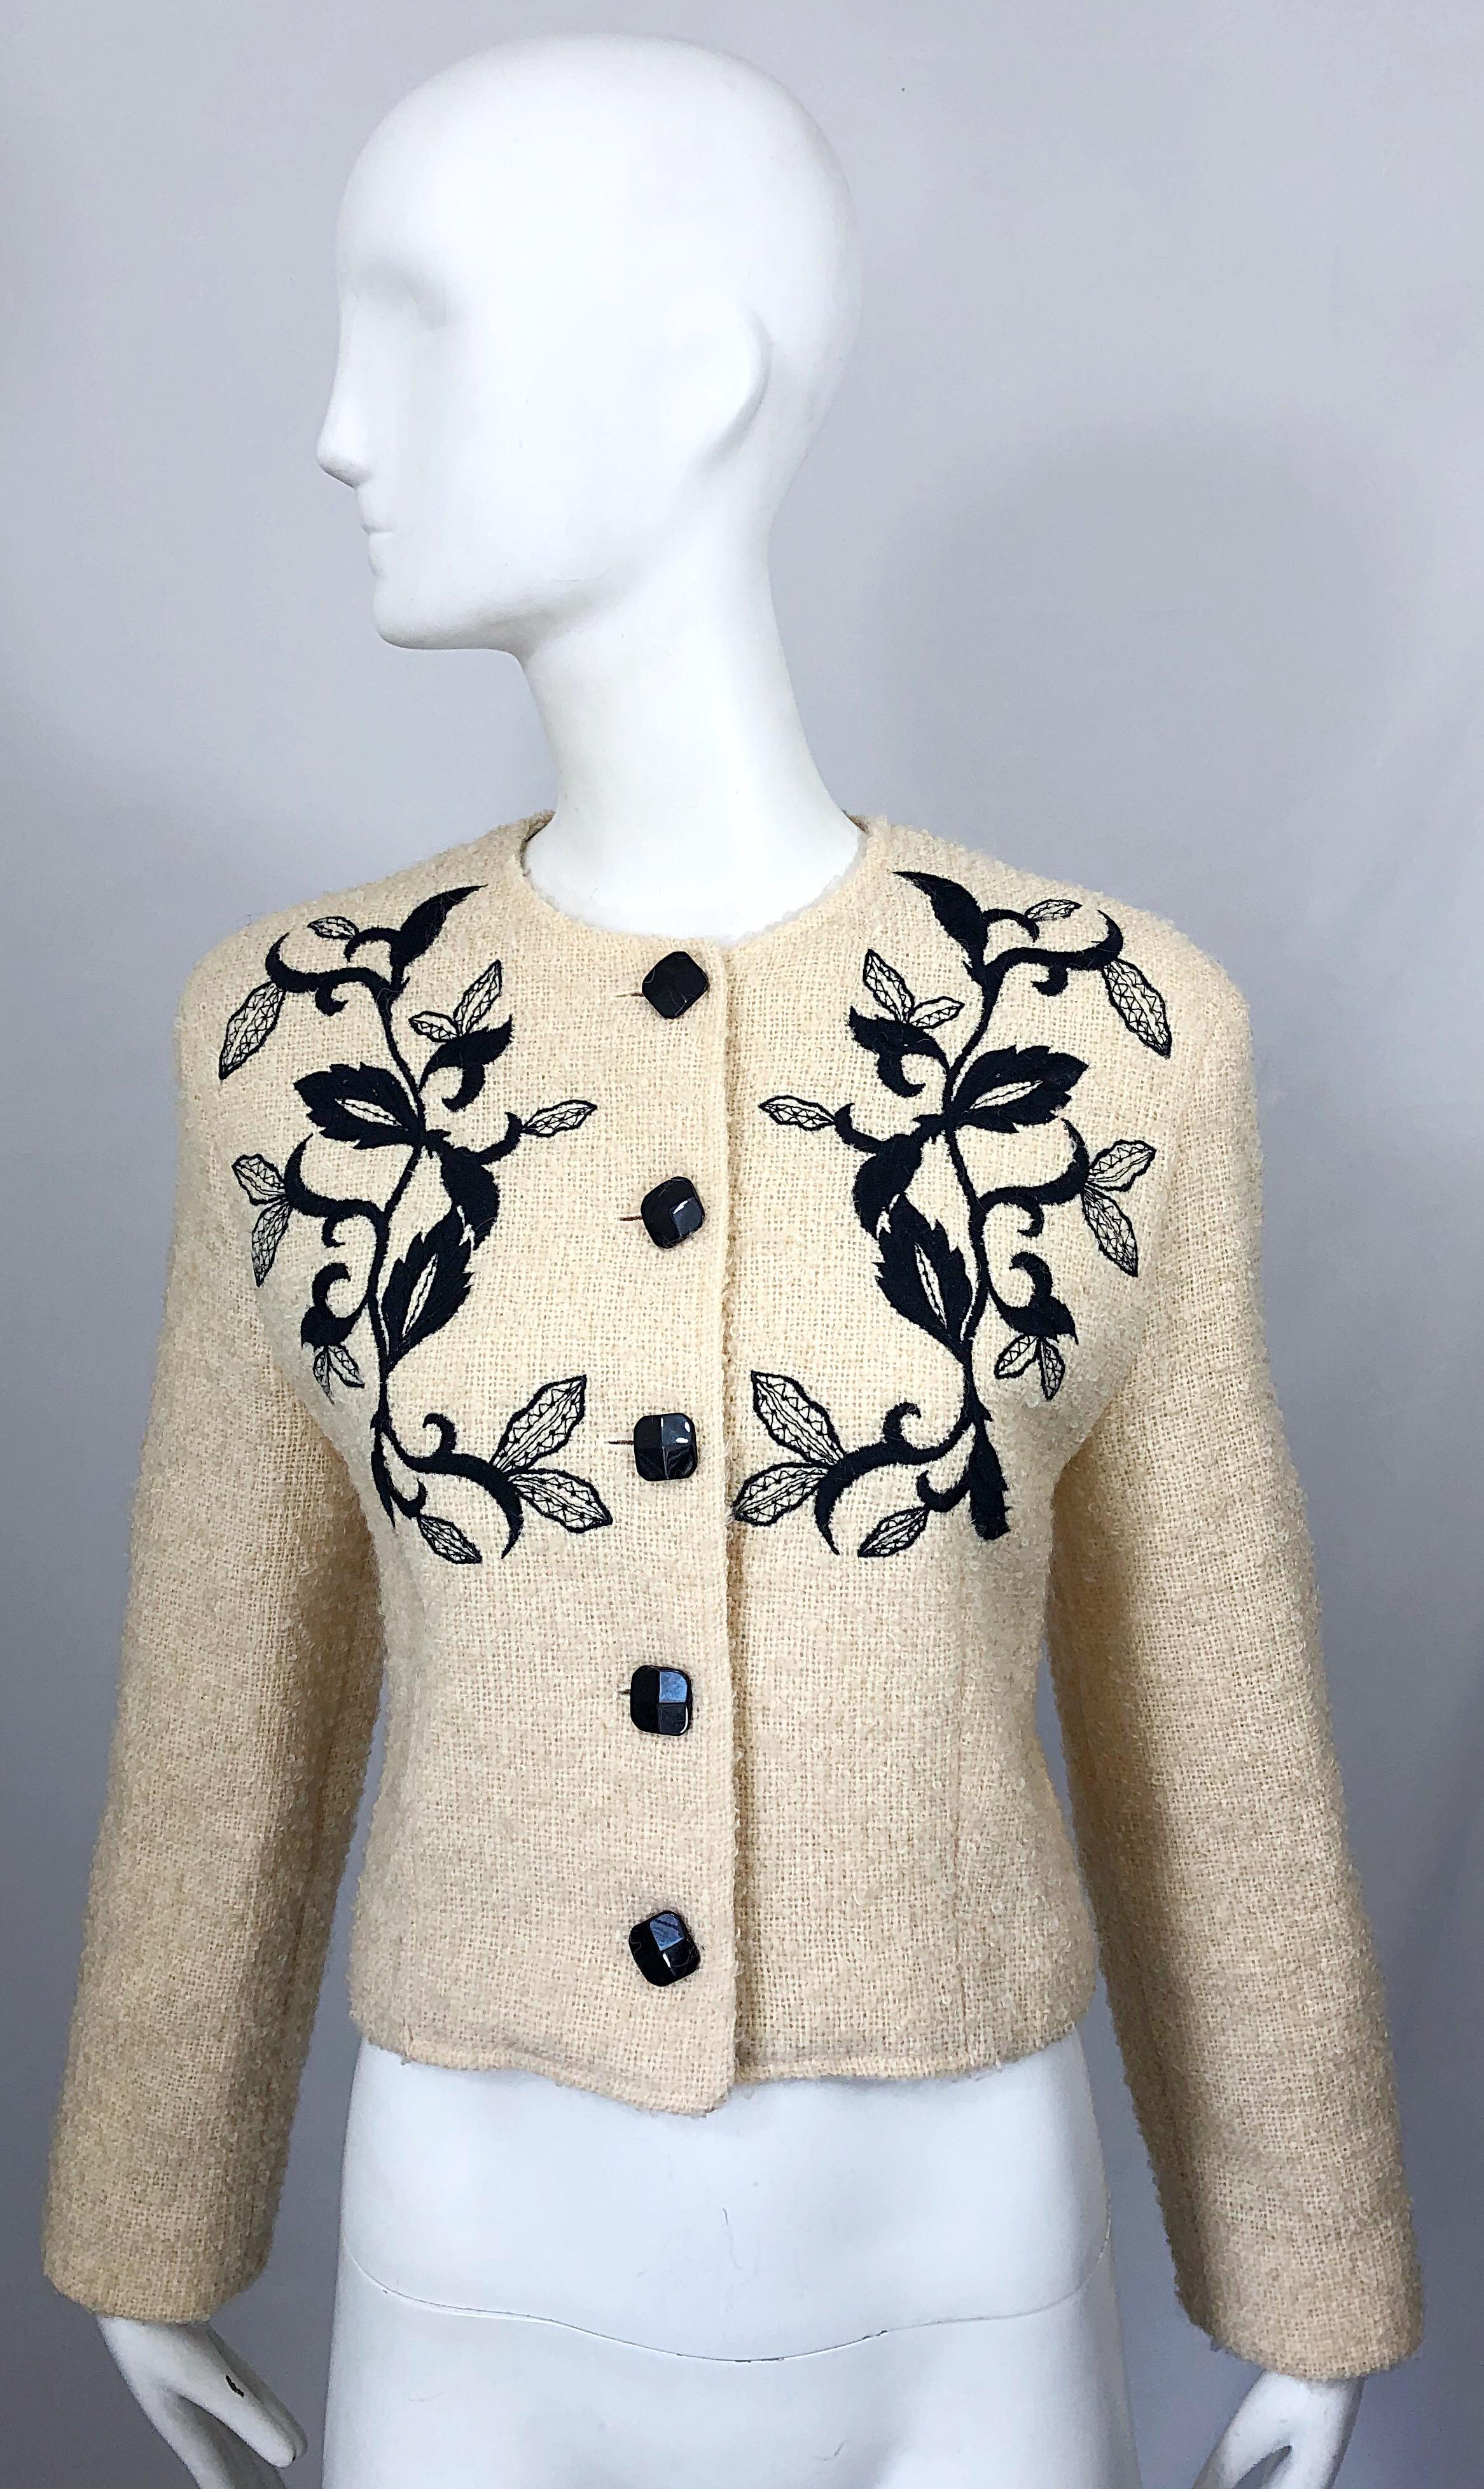 Stylish vintage 90s GUY LAROCHE ivory and black embroidered cropped jacket / blazer ! Features a soft ivory wool with intricate black embroidery on the front. Black lacquer buttons up the front. Fully lined in silk. Can easily be dressed up or down,